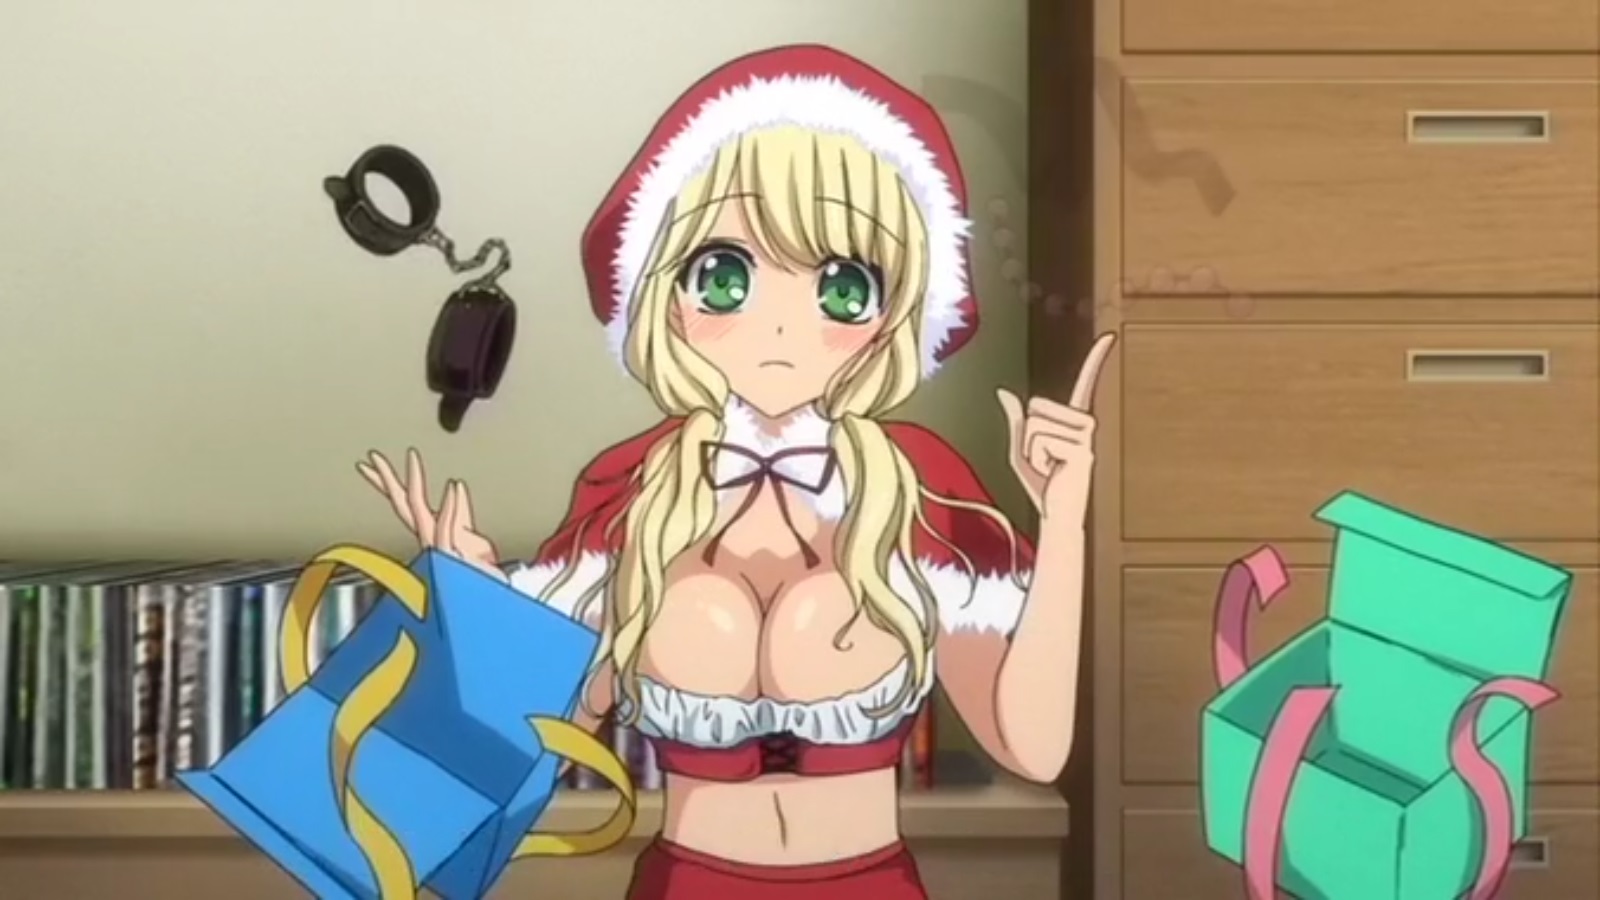 Sexy Christmas Anime Hent - Big Tits Blonde Miss Hentai Video Santa - HentaiVideo.tv